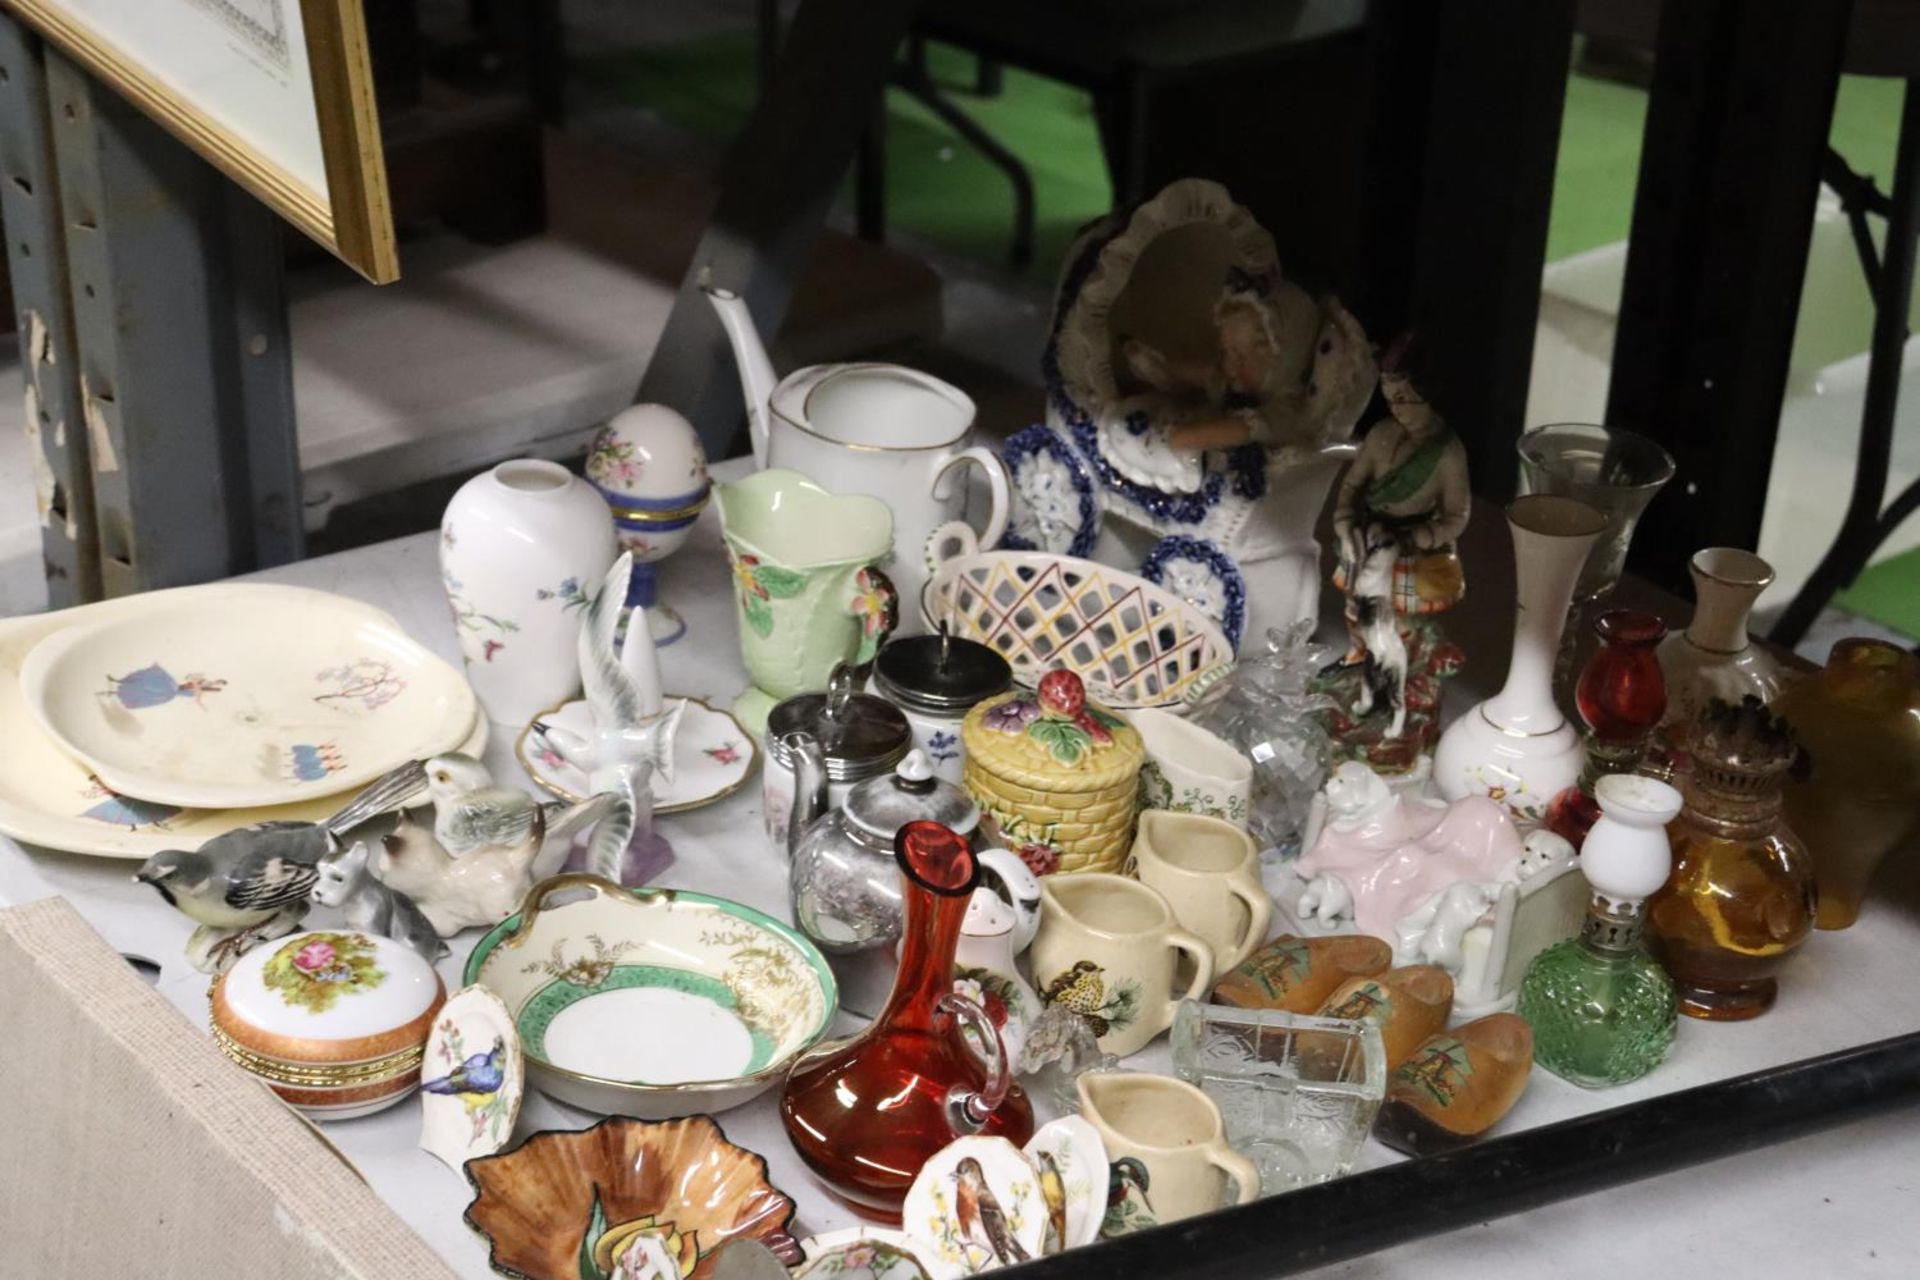 A LARGE, VINTAGE COLLECTION OF CERAMICS TO INCLUDE FIGURES, BIRDS, JUGS, BOWLS, SMALL PLATES, ETC - Image 6 of 6